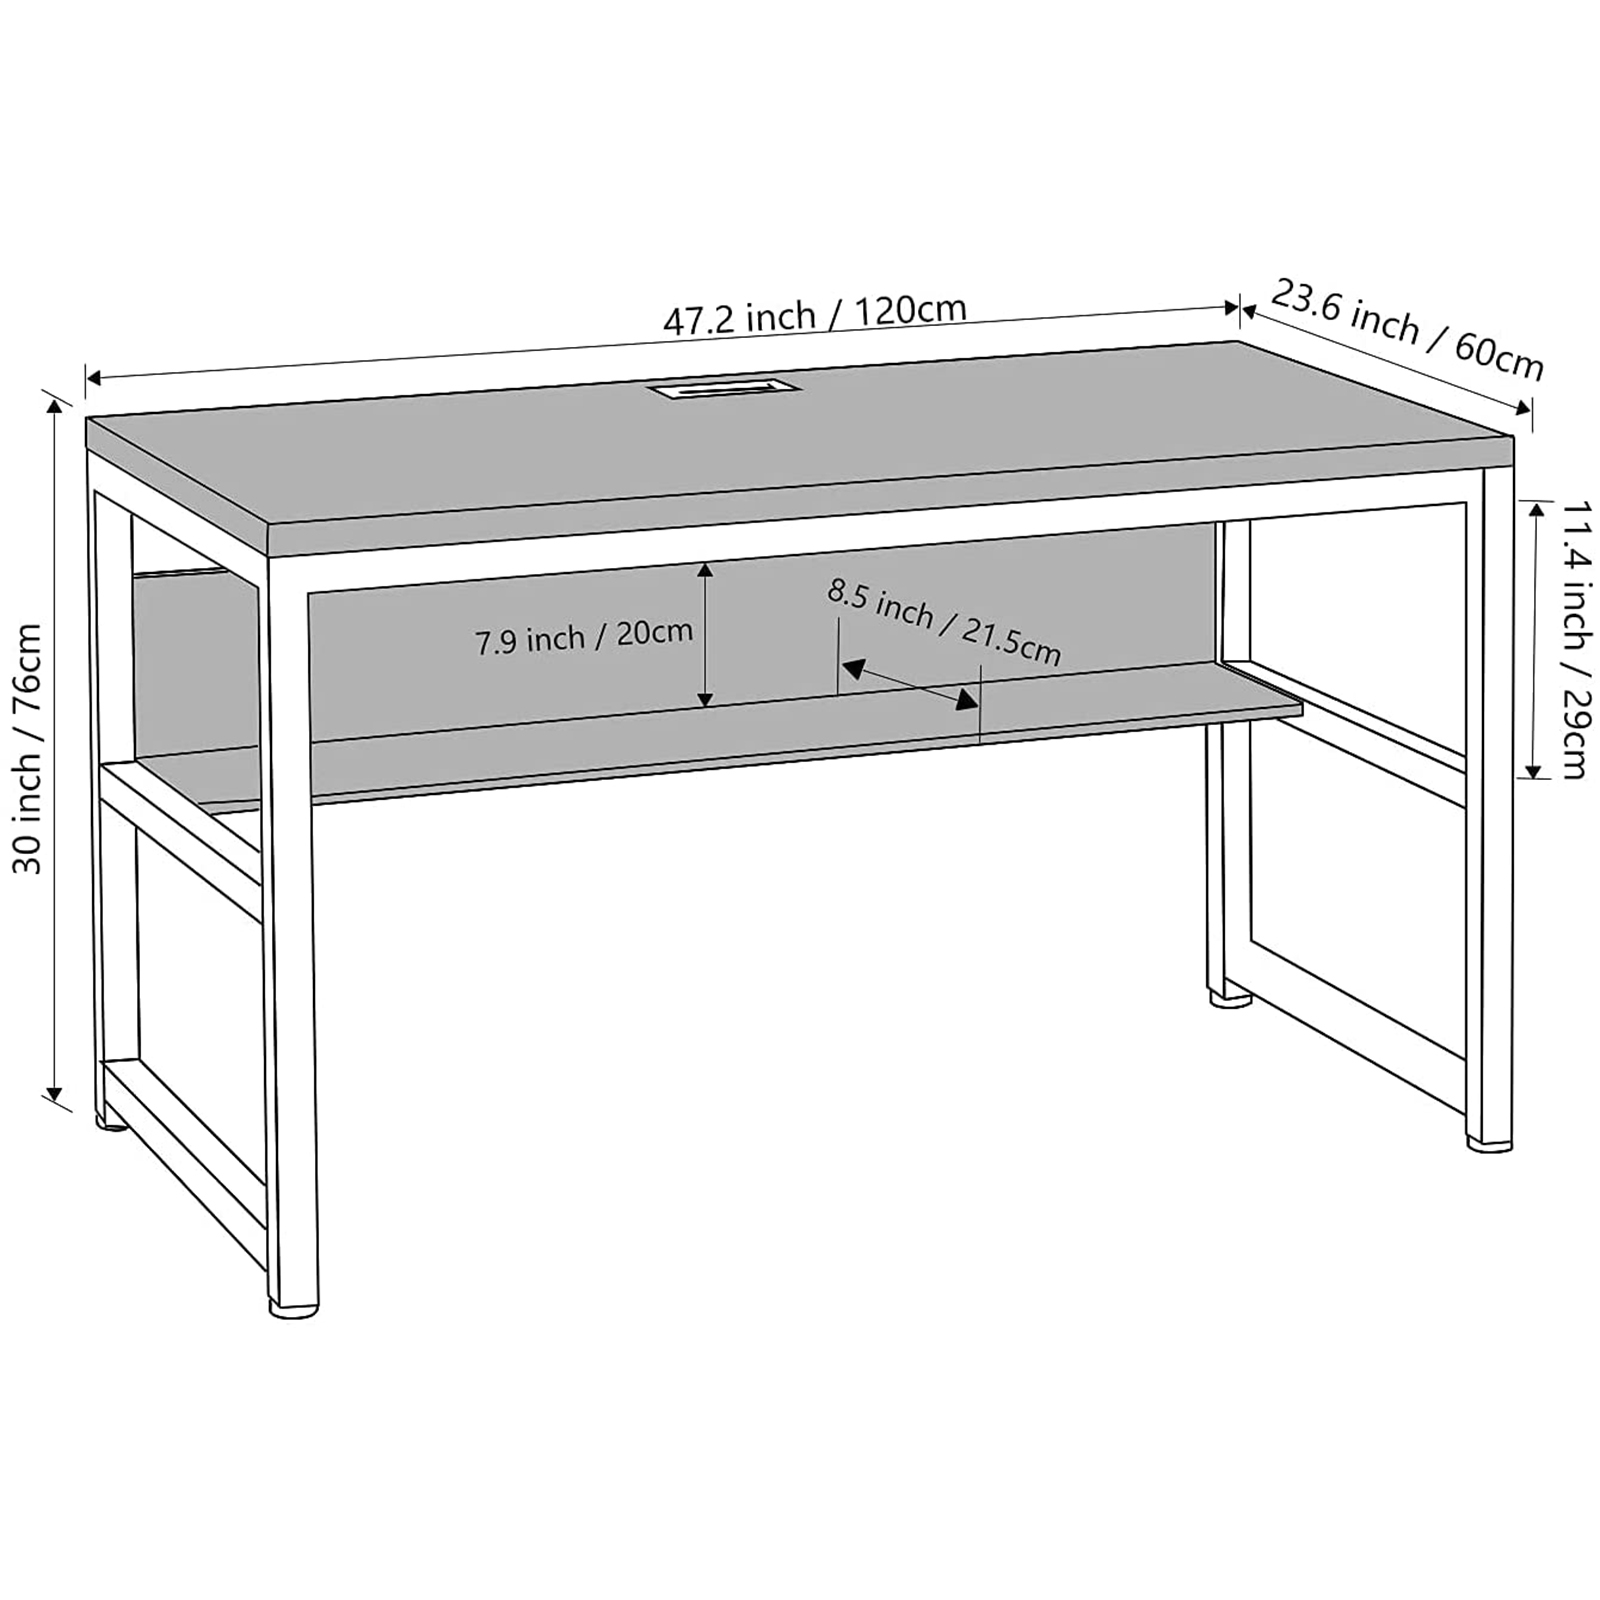 TOPSKY 47" Computer Desk with Bookshelf/Metal Hole Cable Cover 1.18" Thick Desk CT-8025A